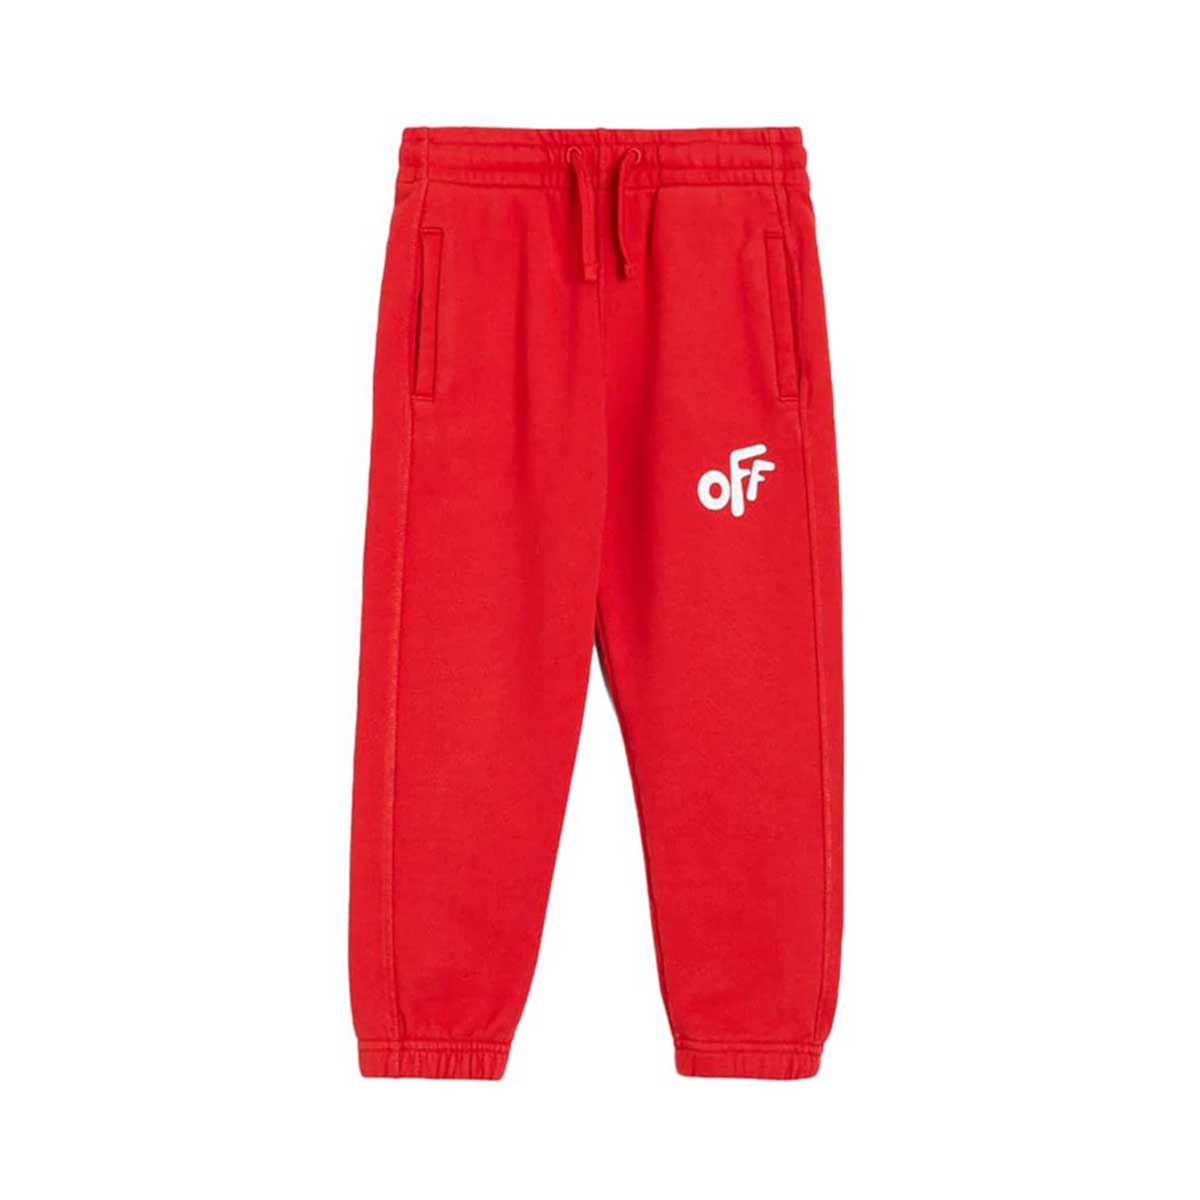 Kids off rounded sweatpants red